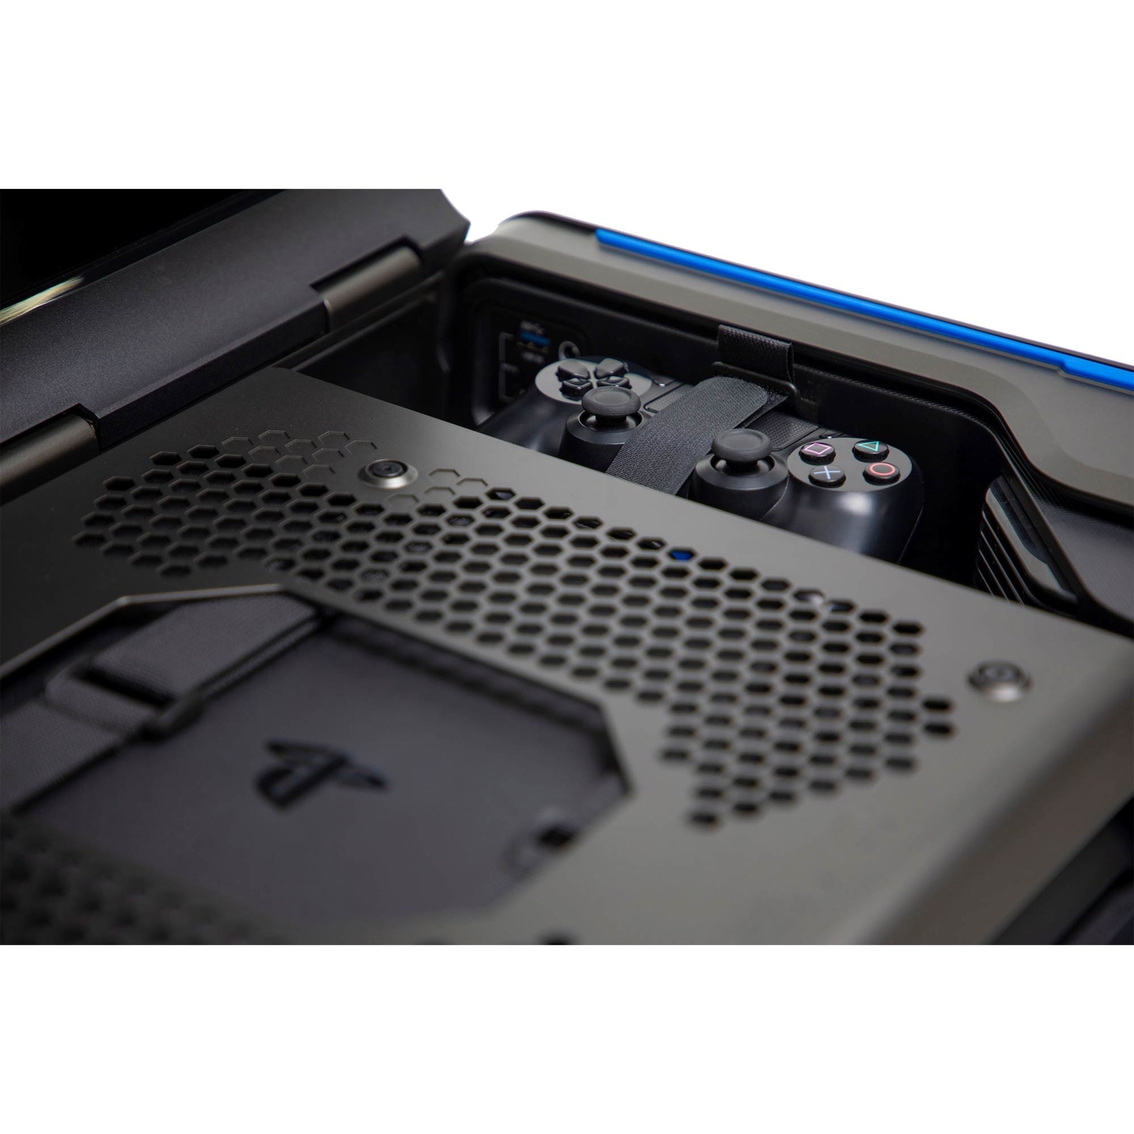 Gaems Guardian Pro Xp Personal Gaming Environment For Ps4, Xbox 1